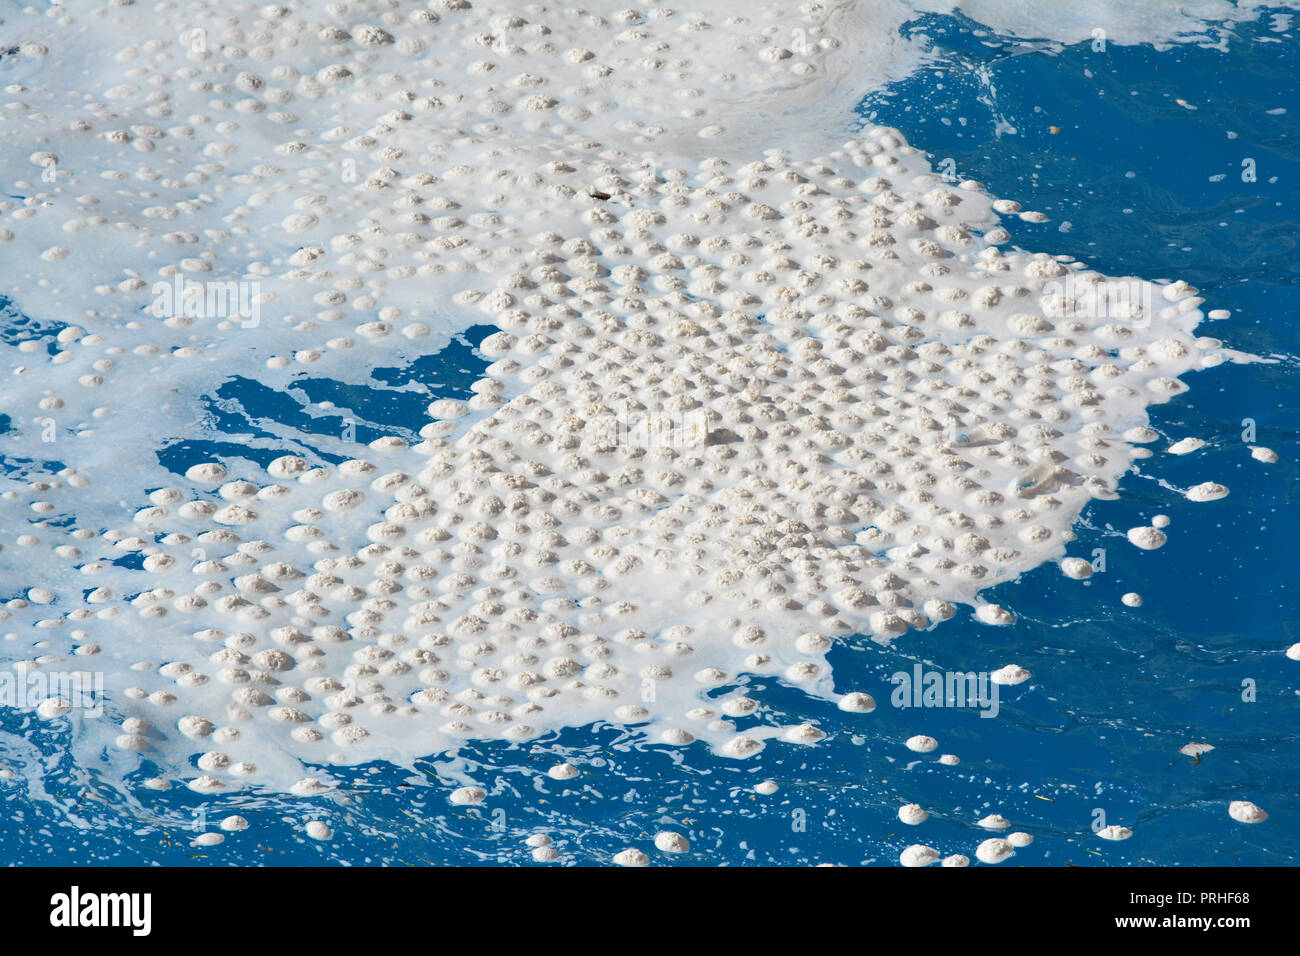 Sea snots, or Marine Mycilage, or Marine snow on the surface of Ionian Sea, close up view Stock Photo